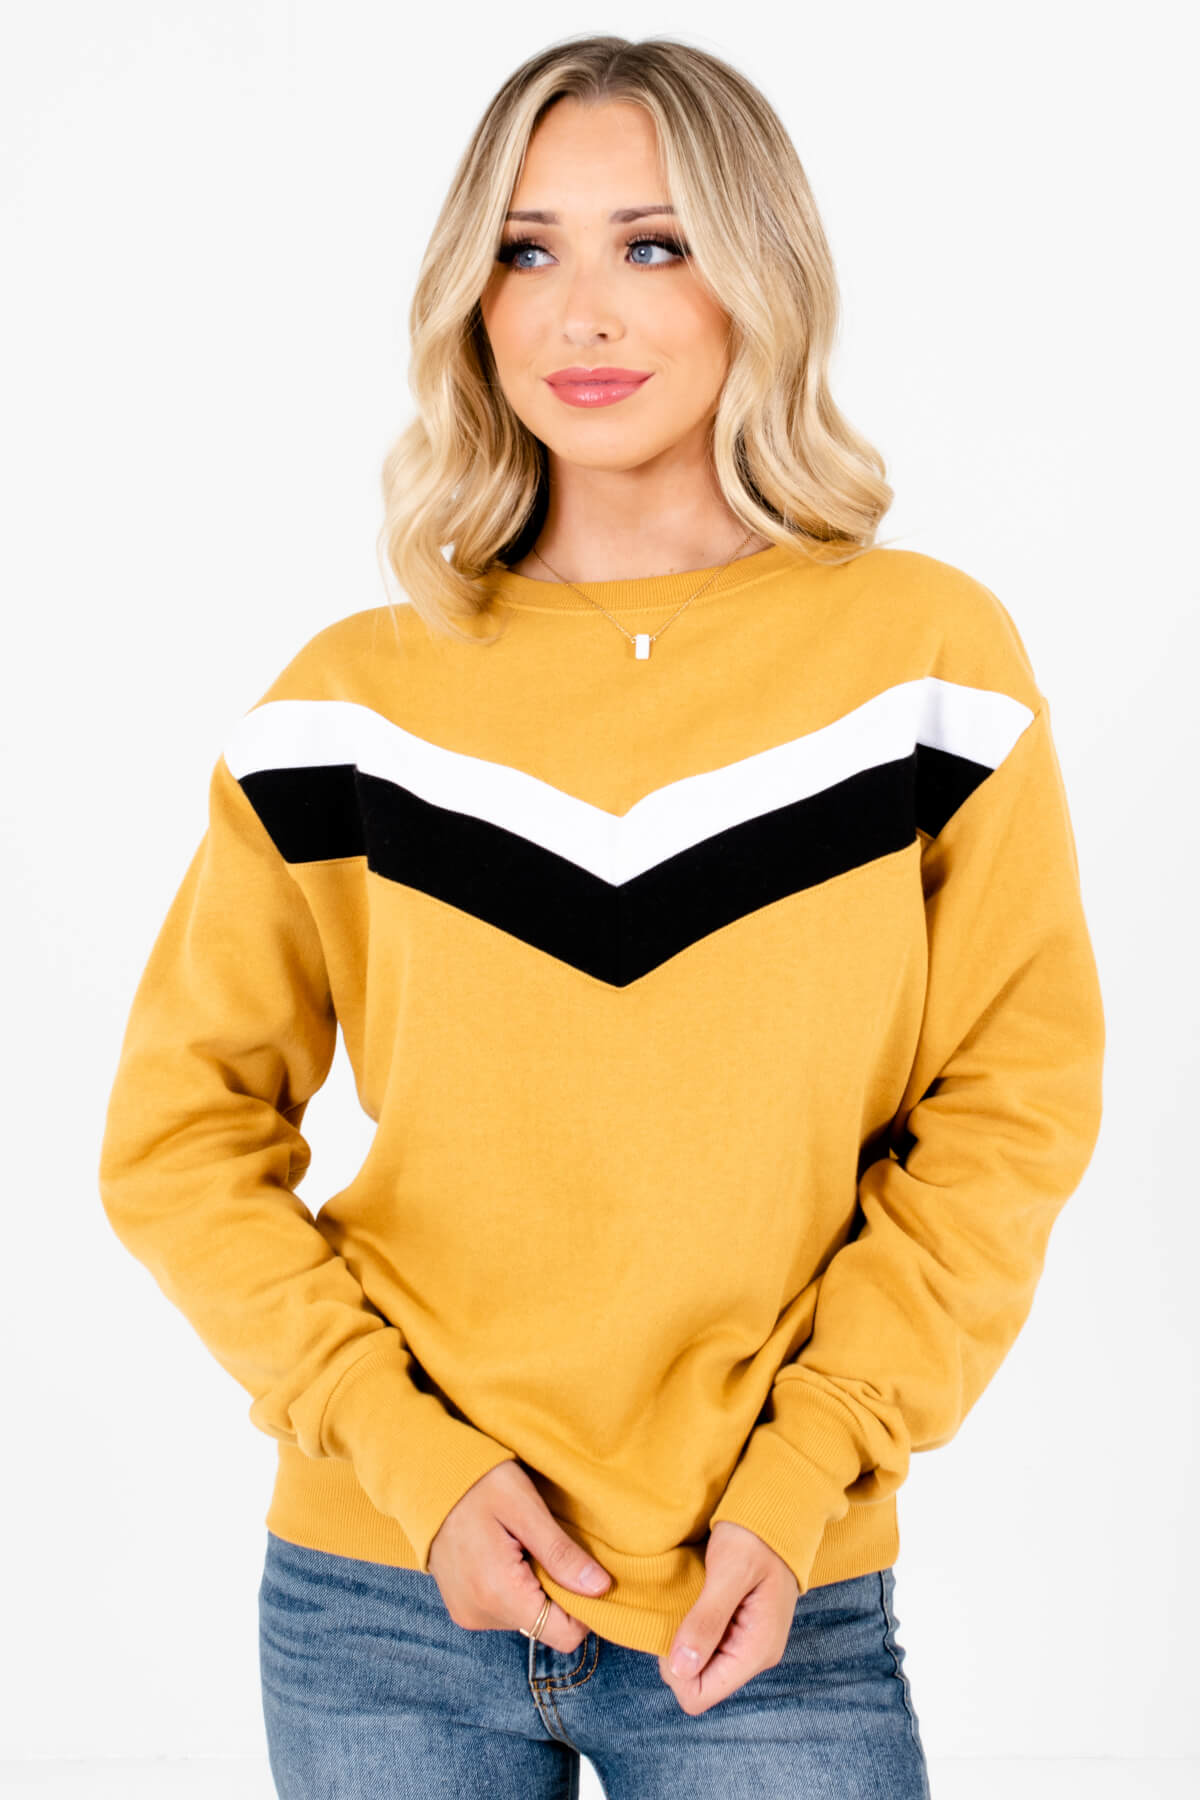 Mustard Yellow Retro Stripe Patterned Boutique Pullovers for Women